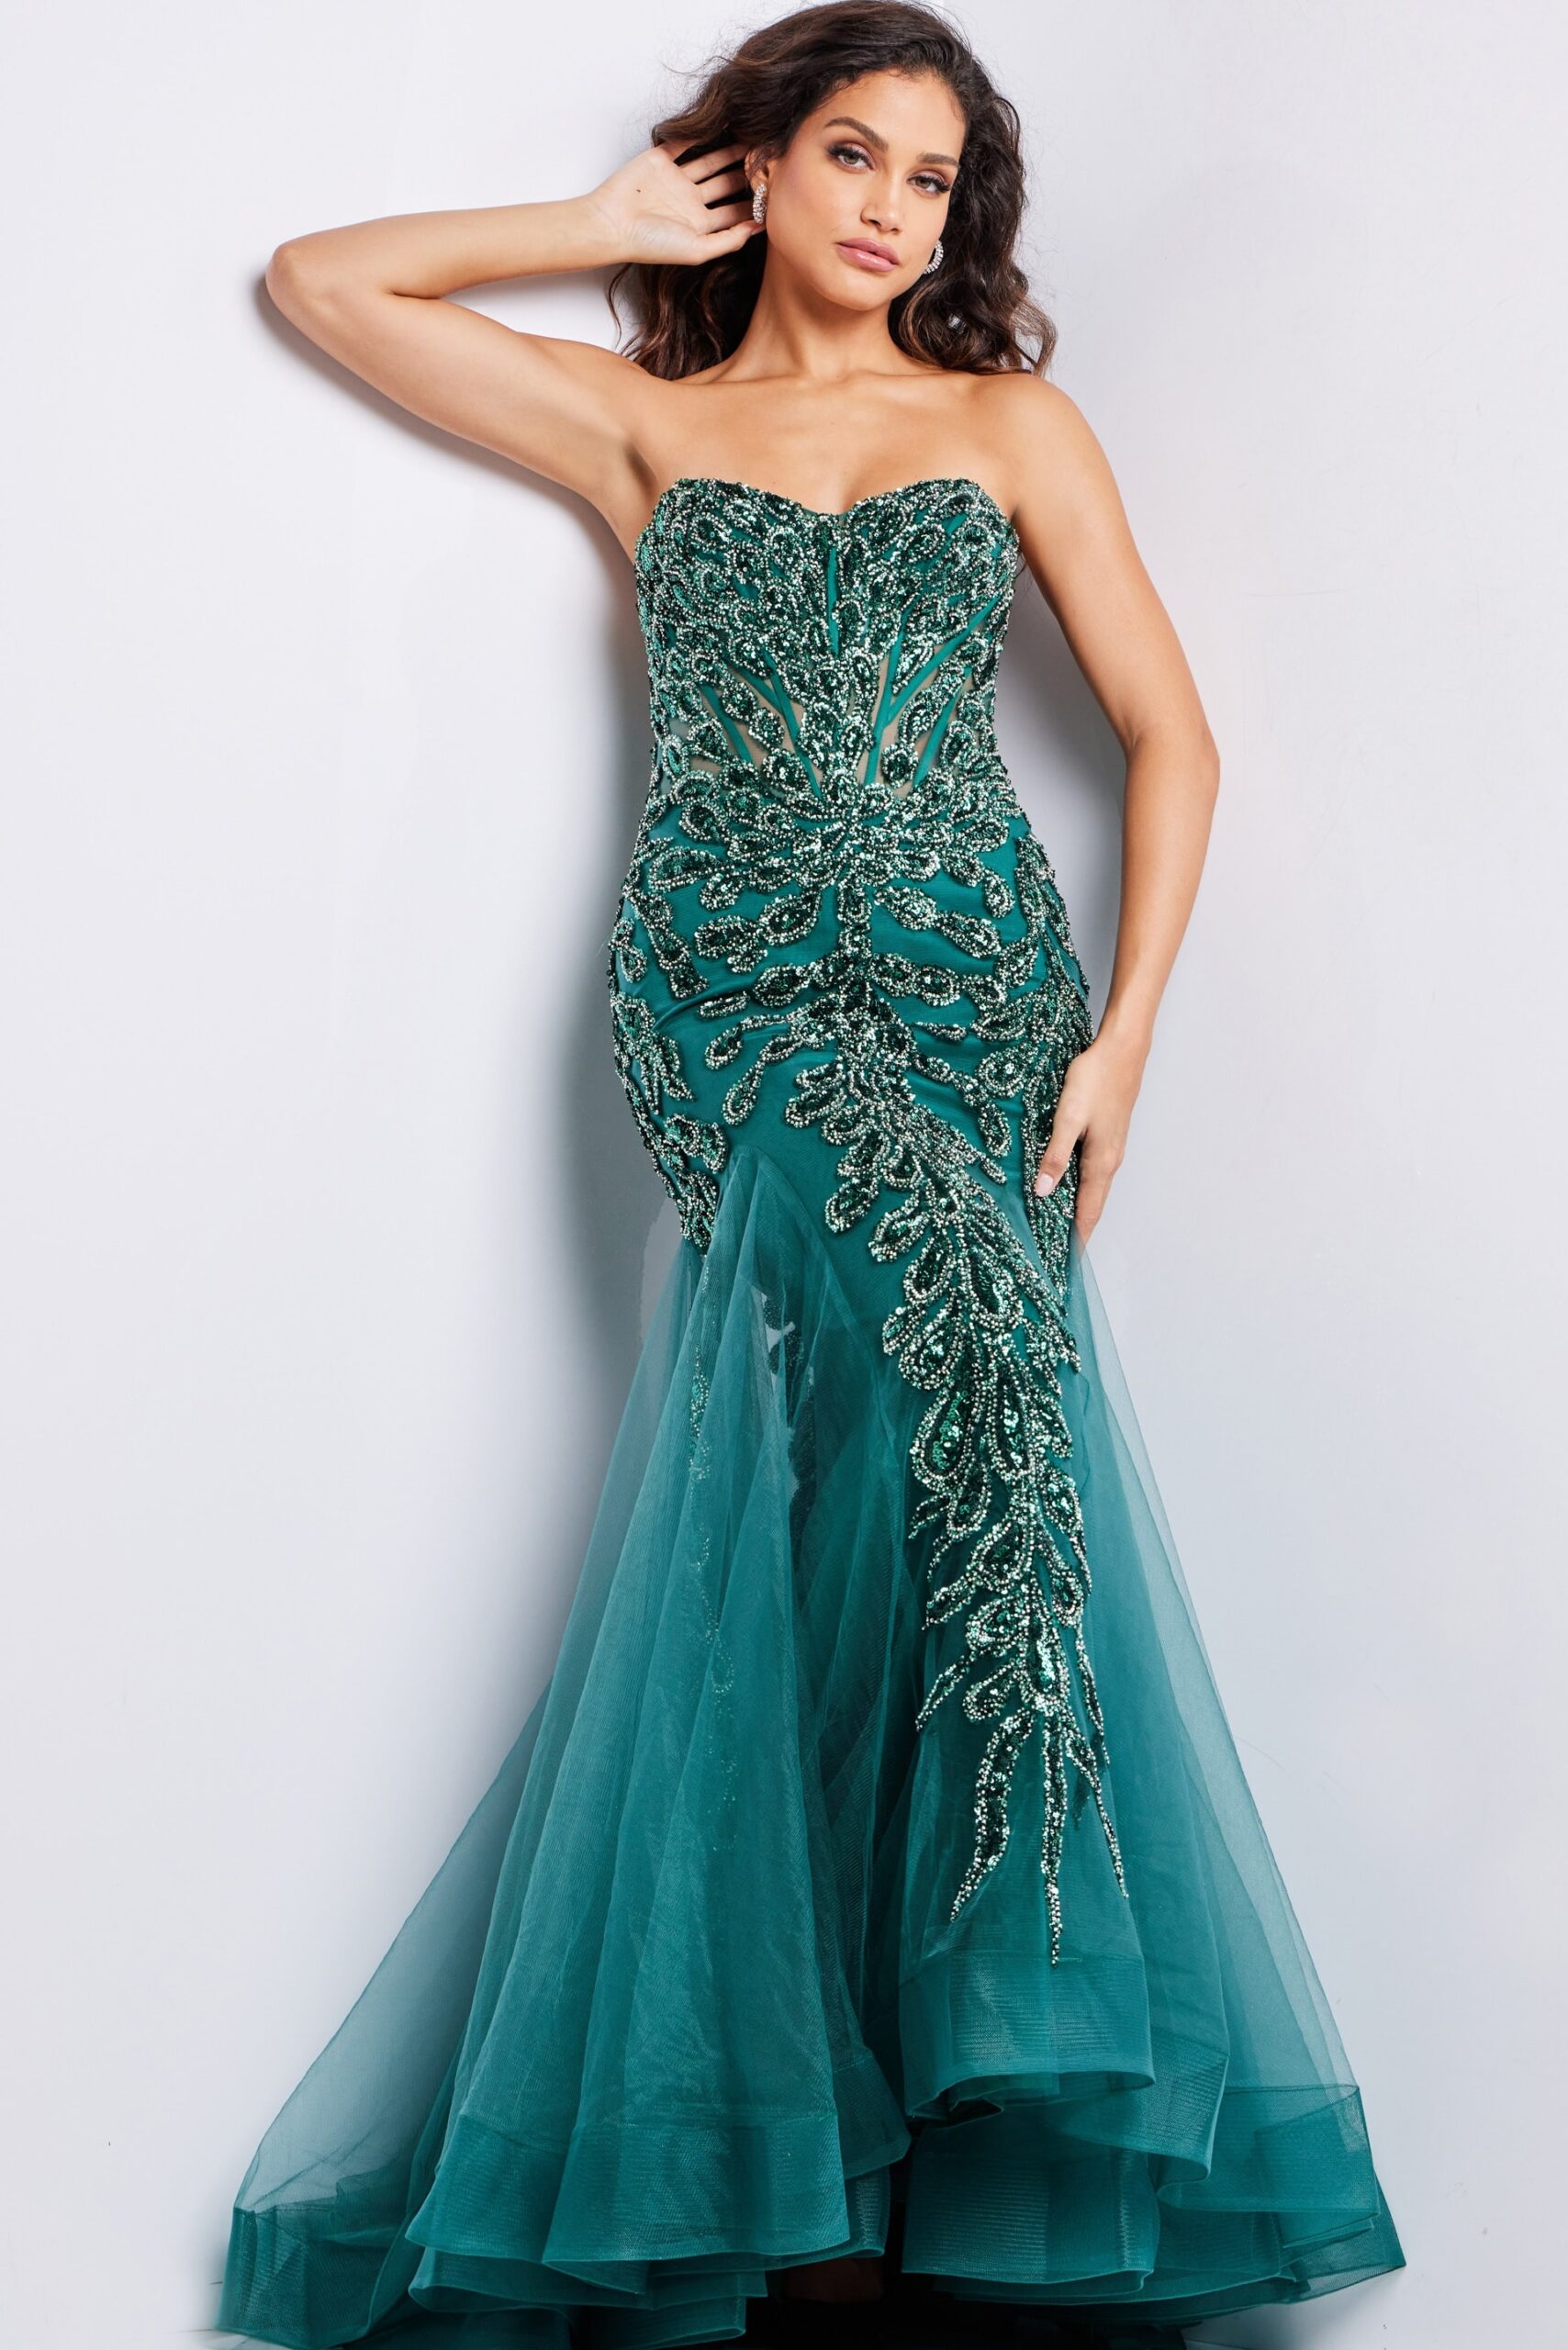 Model wearing Emerald Sequin Embellished Gown 37412